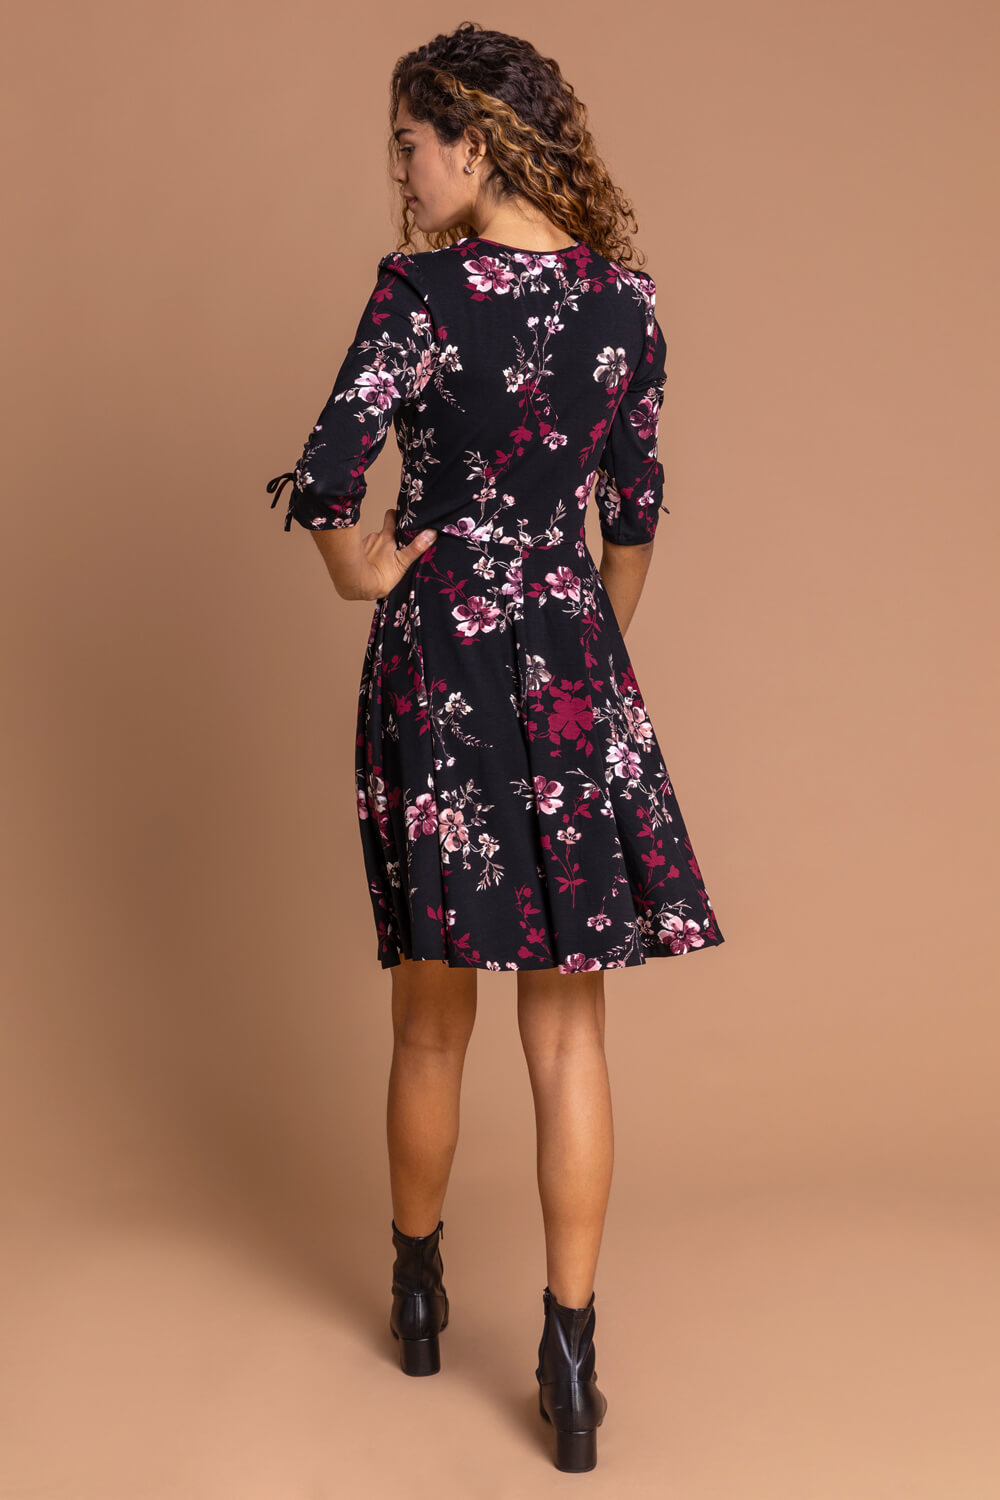 Wine Floral Print Gathered Dress, Image 2 of 5